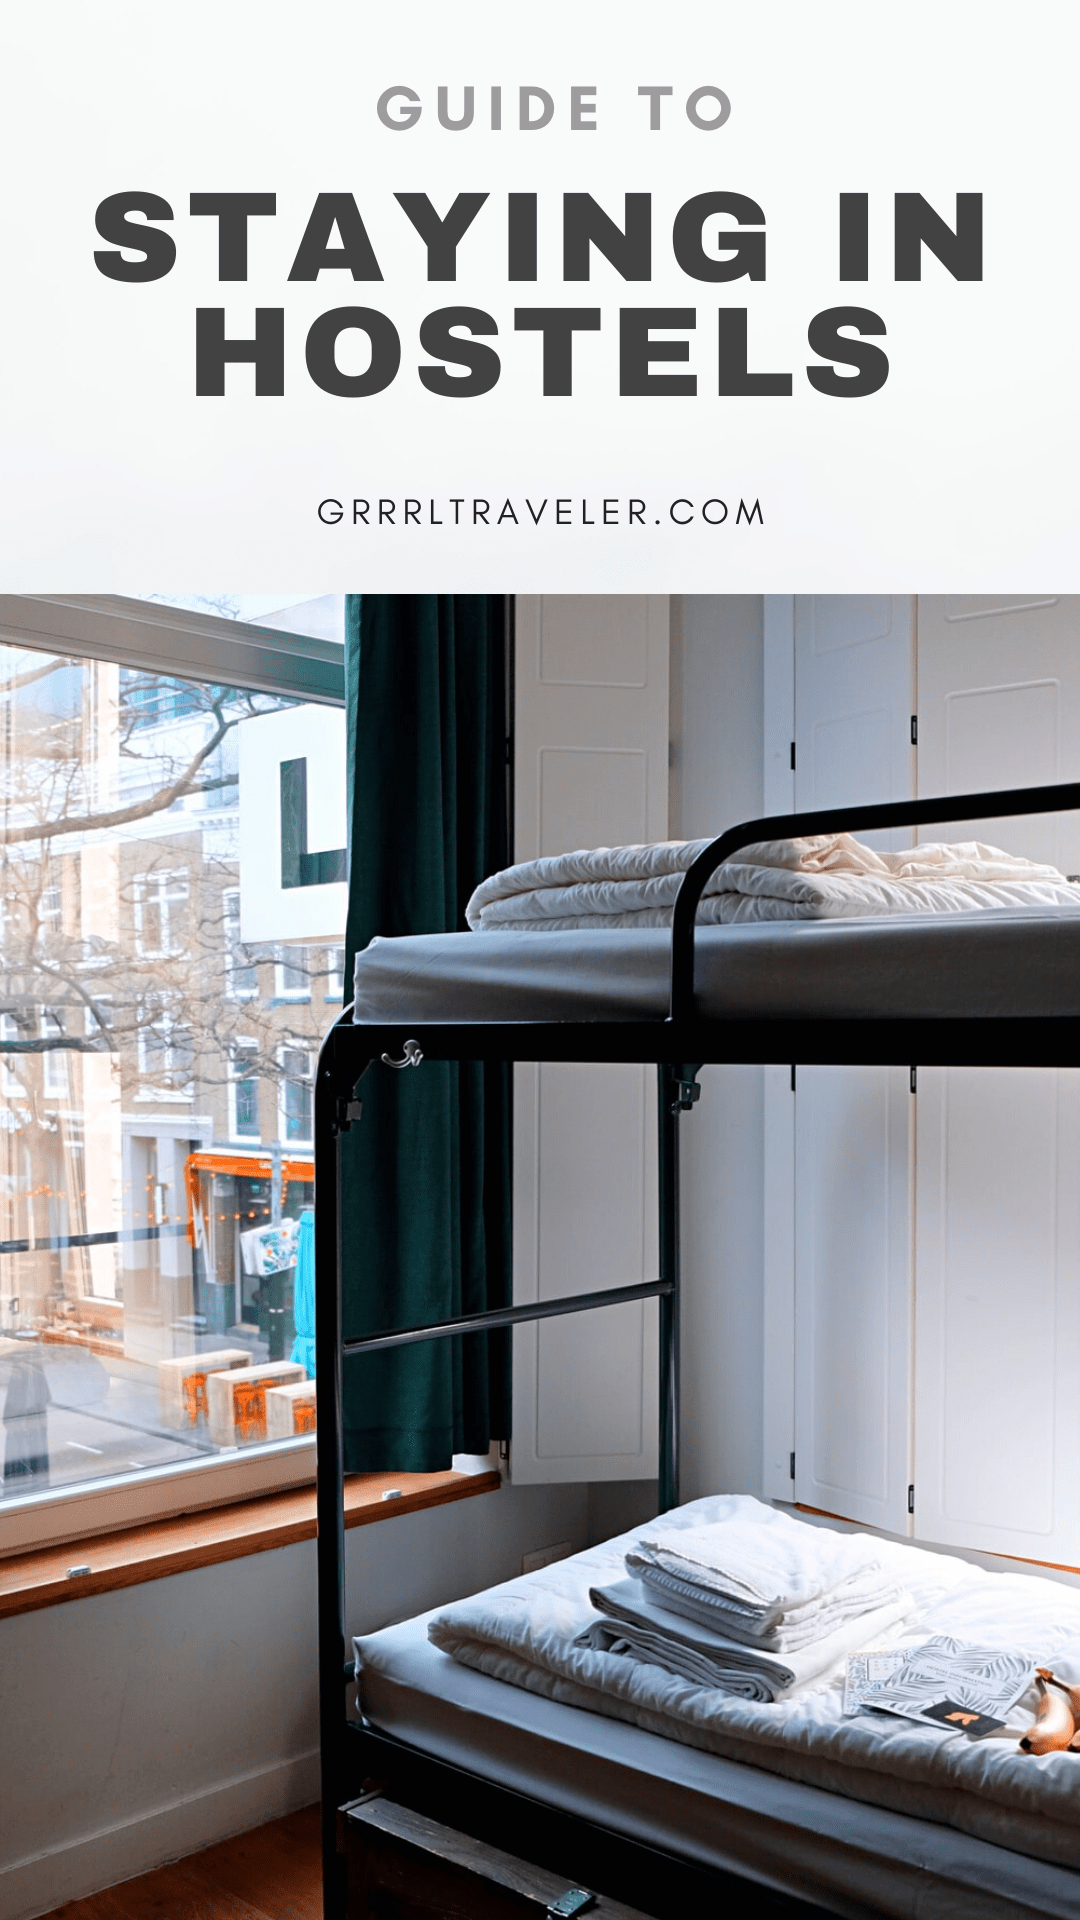 GUIDE TO STAYING IN HOSTELS